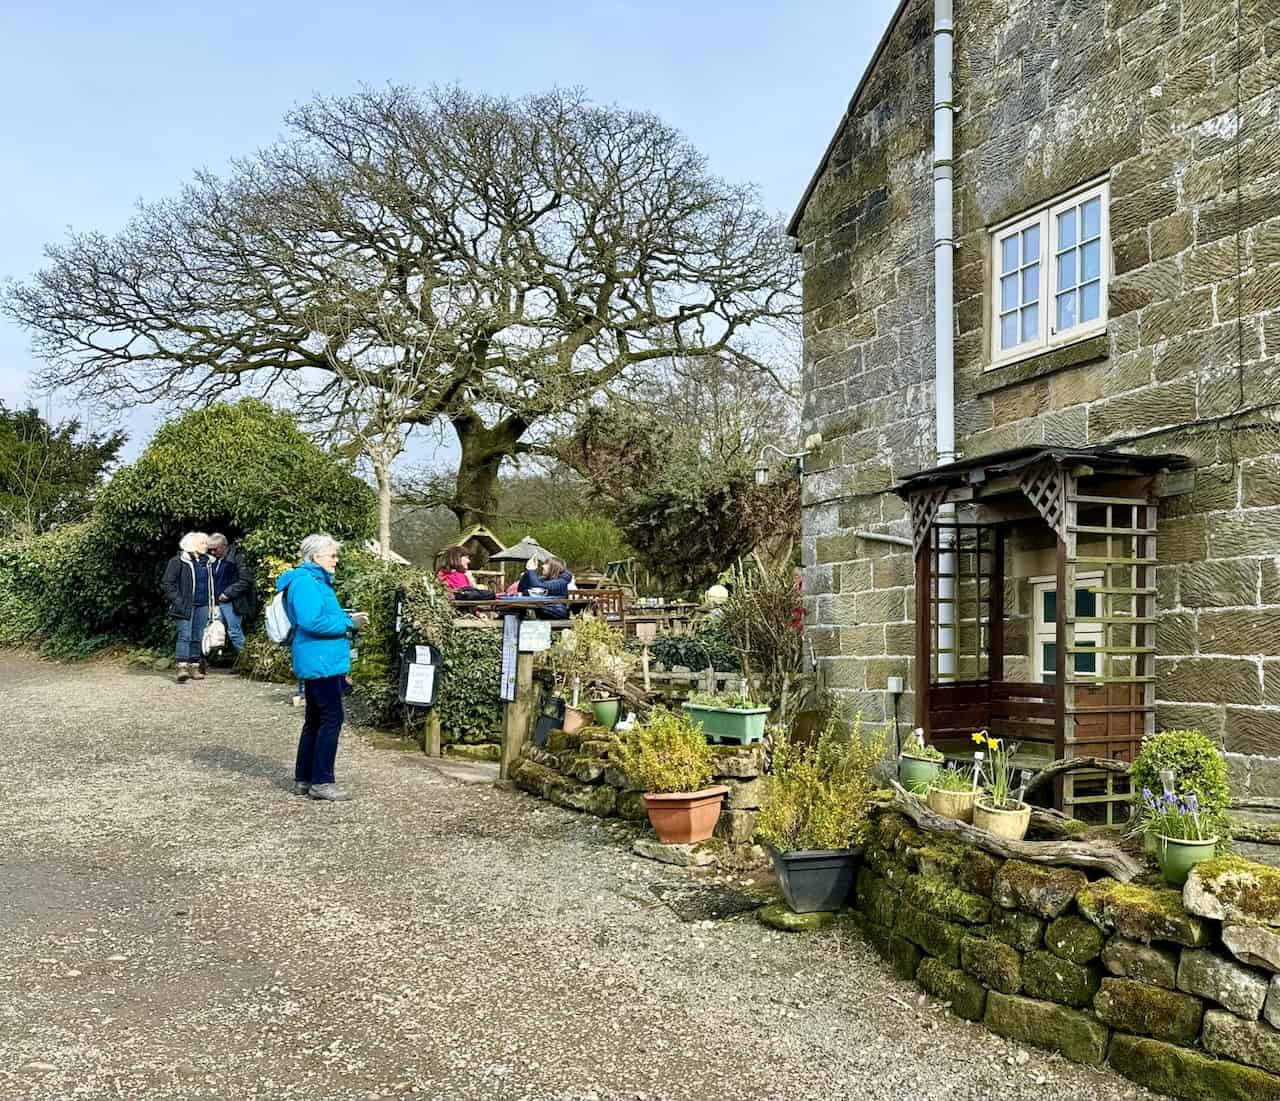 The Daffy Caffy at High Mill provides a charming pit stop for refreshments amidst the beauty of the Farndale daffodils.